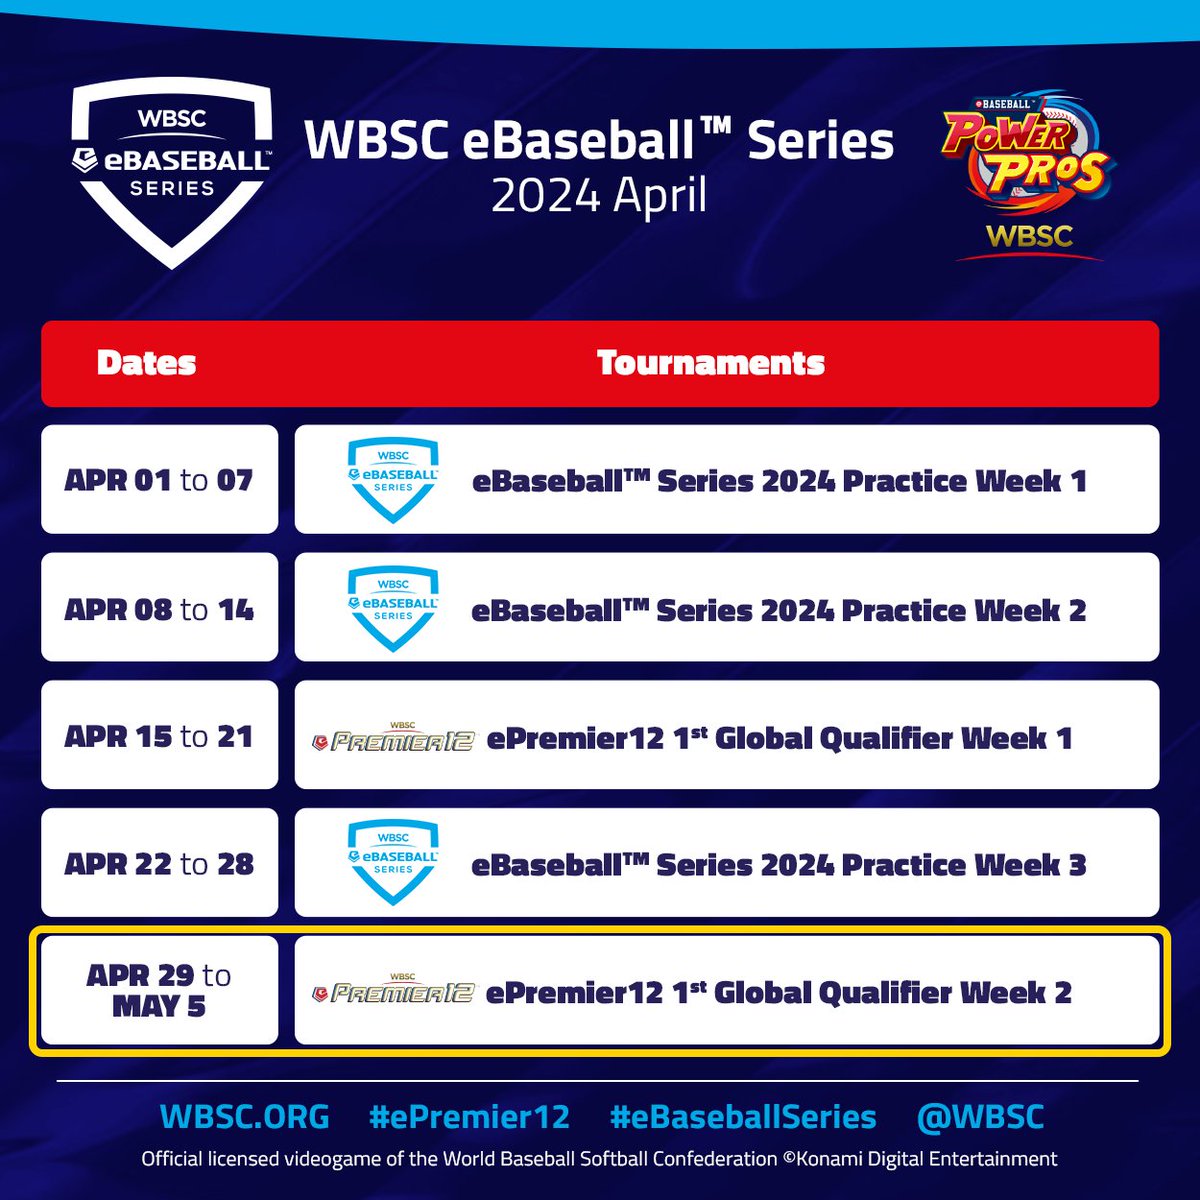 🎮🔛 ePremier12 1st Global Qualifier Week 2 just started!
🔝 Finish within the top 50 and earn points to advance to the Play-Off!
🔗 Details here: konami.com/pawa/wbsc/en/

@Konami | #ePremier12 #eBaseballSeries